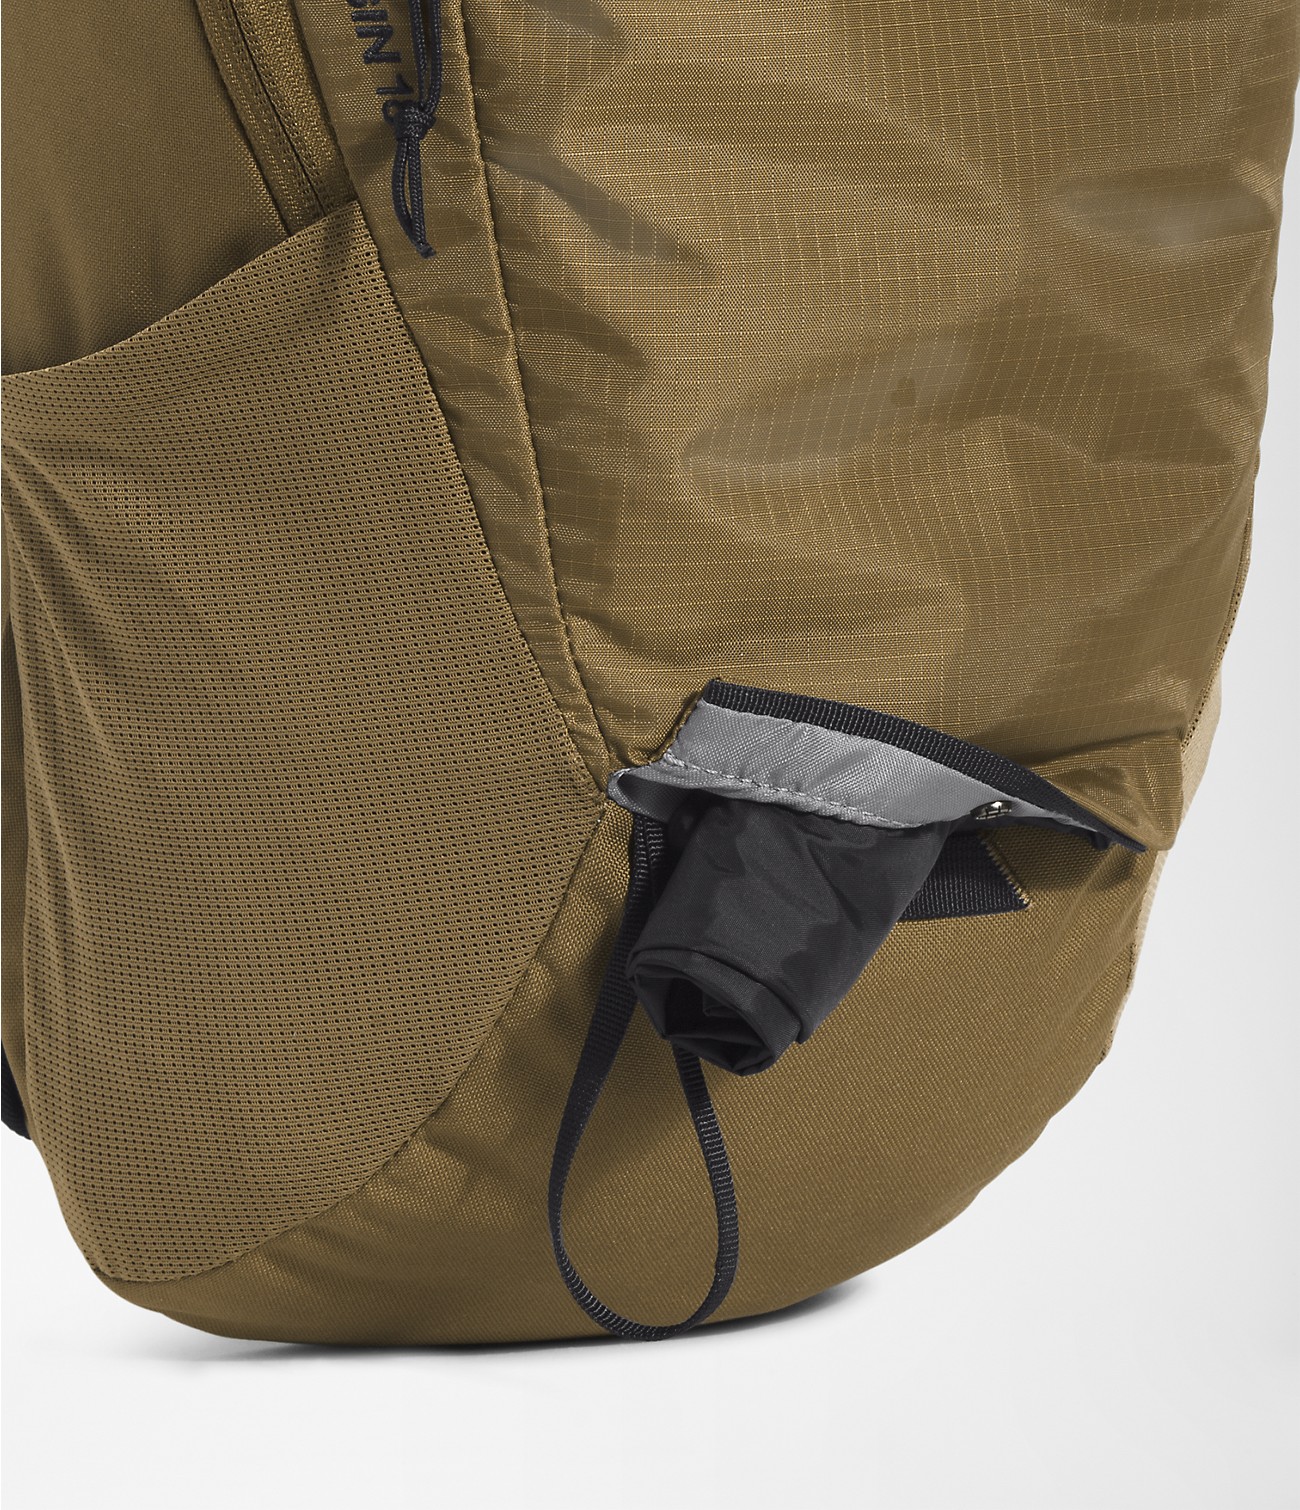 Basin 18 Backpack | The North Face